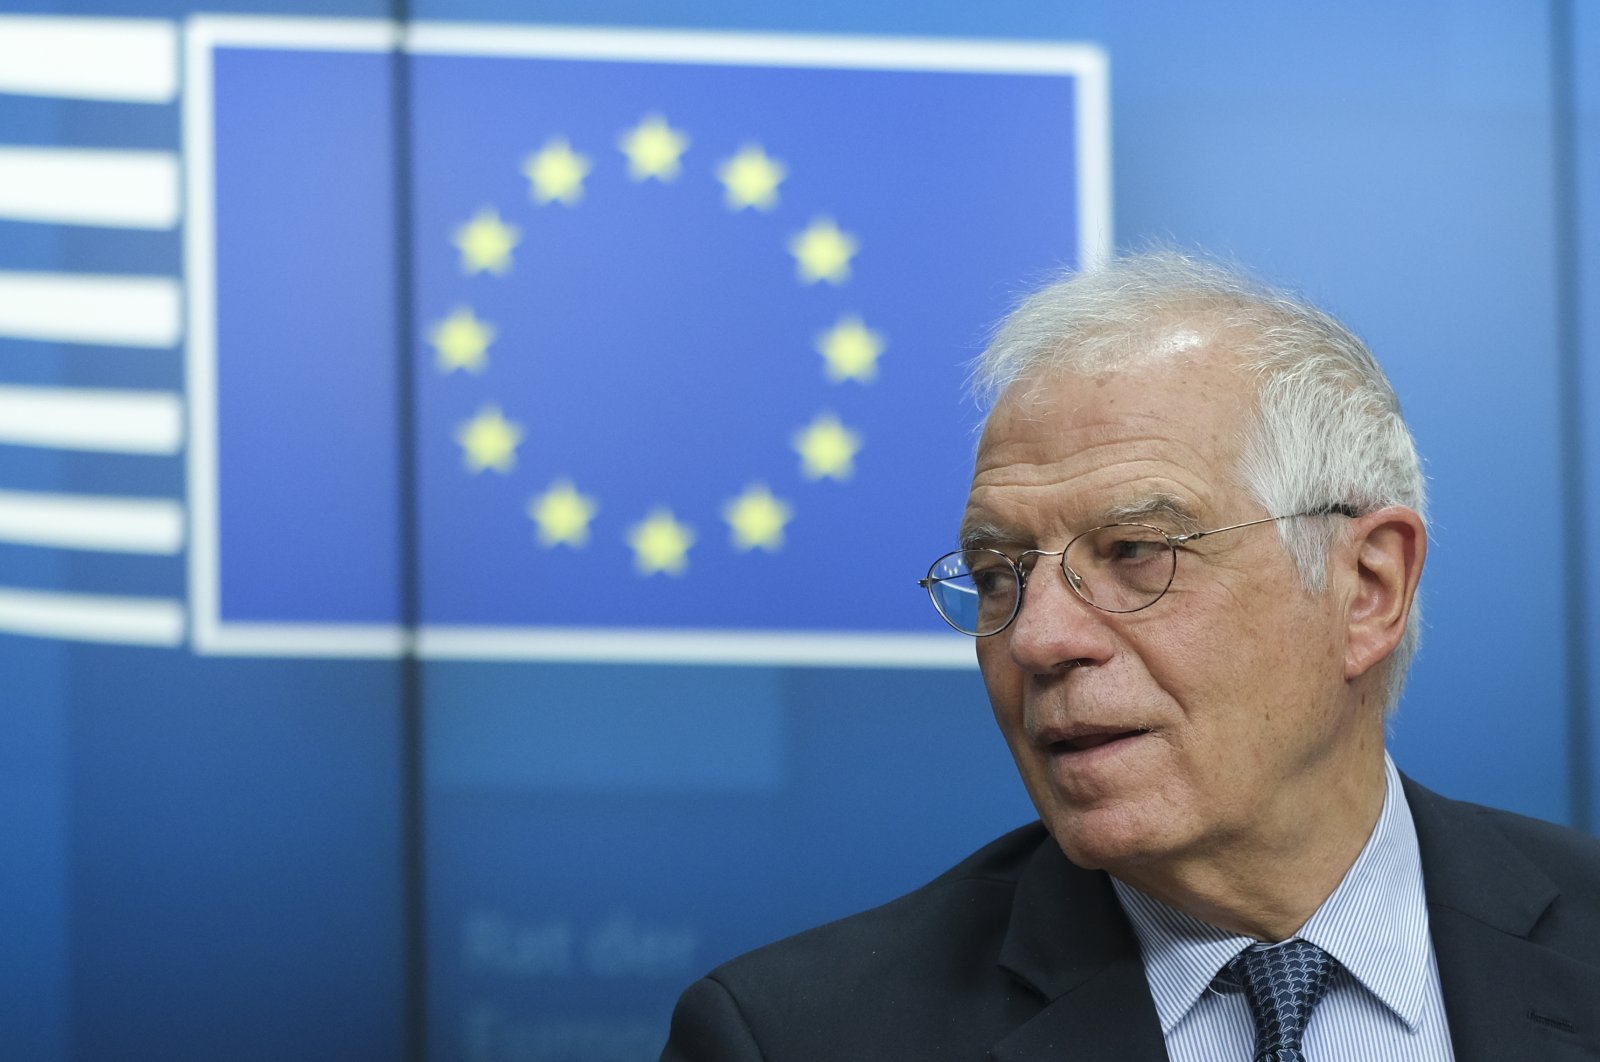 EU foreign policy chief Josep Borrell speaks during an online news conference following a videoconference for a European foreign and defense ministers meeting at the Europa building, Brussels, June 16, 2020. (AP Photo)